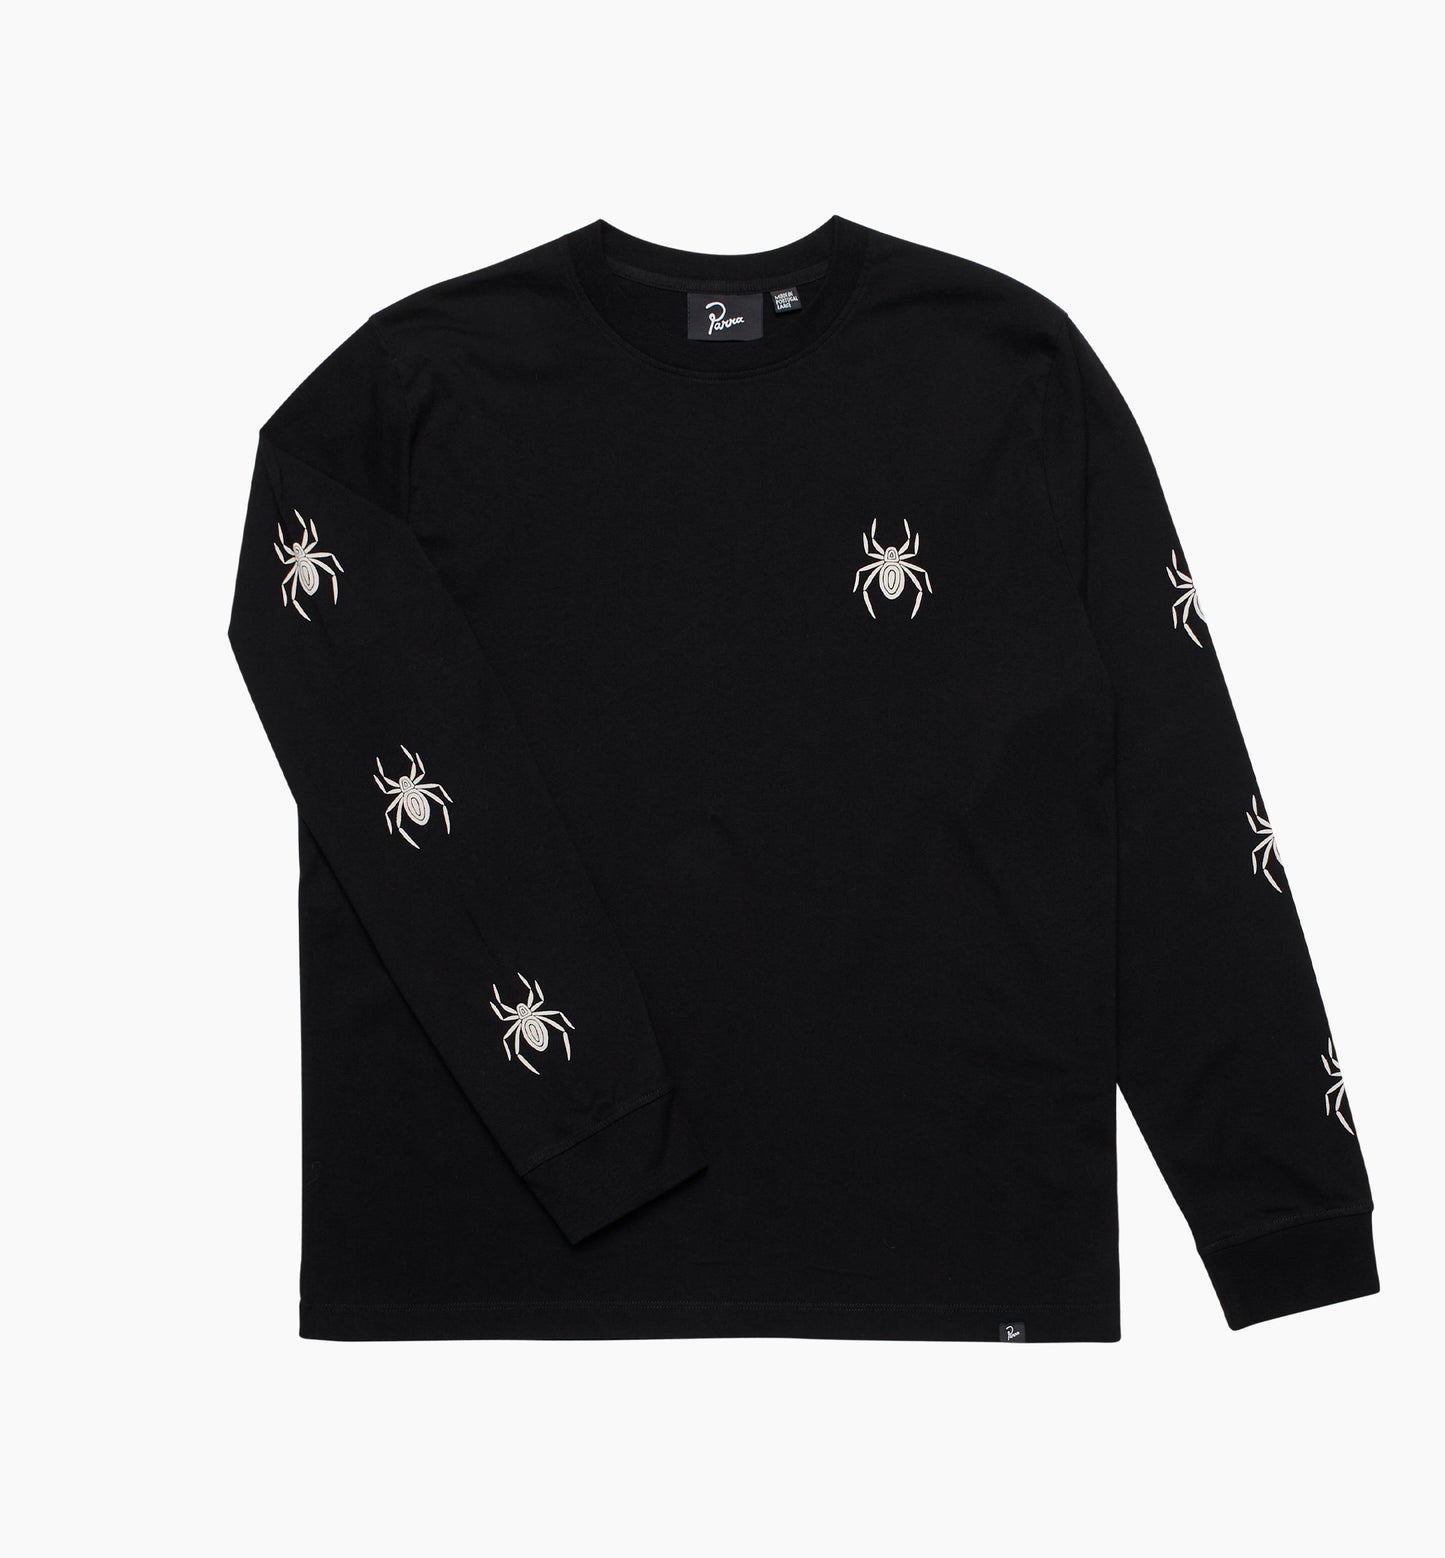 By Parra Spidered Longsleeve T-Shirt Black